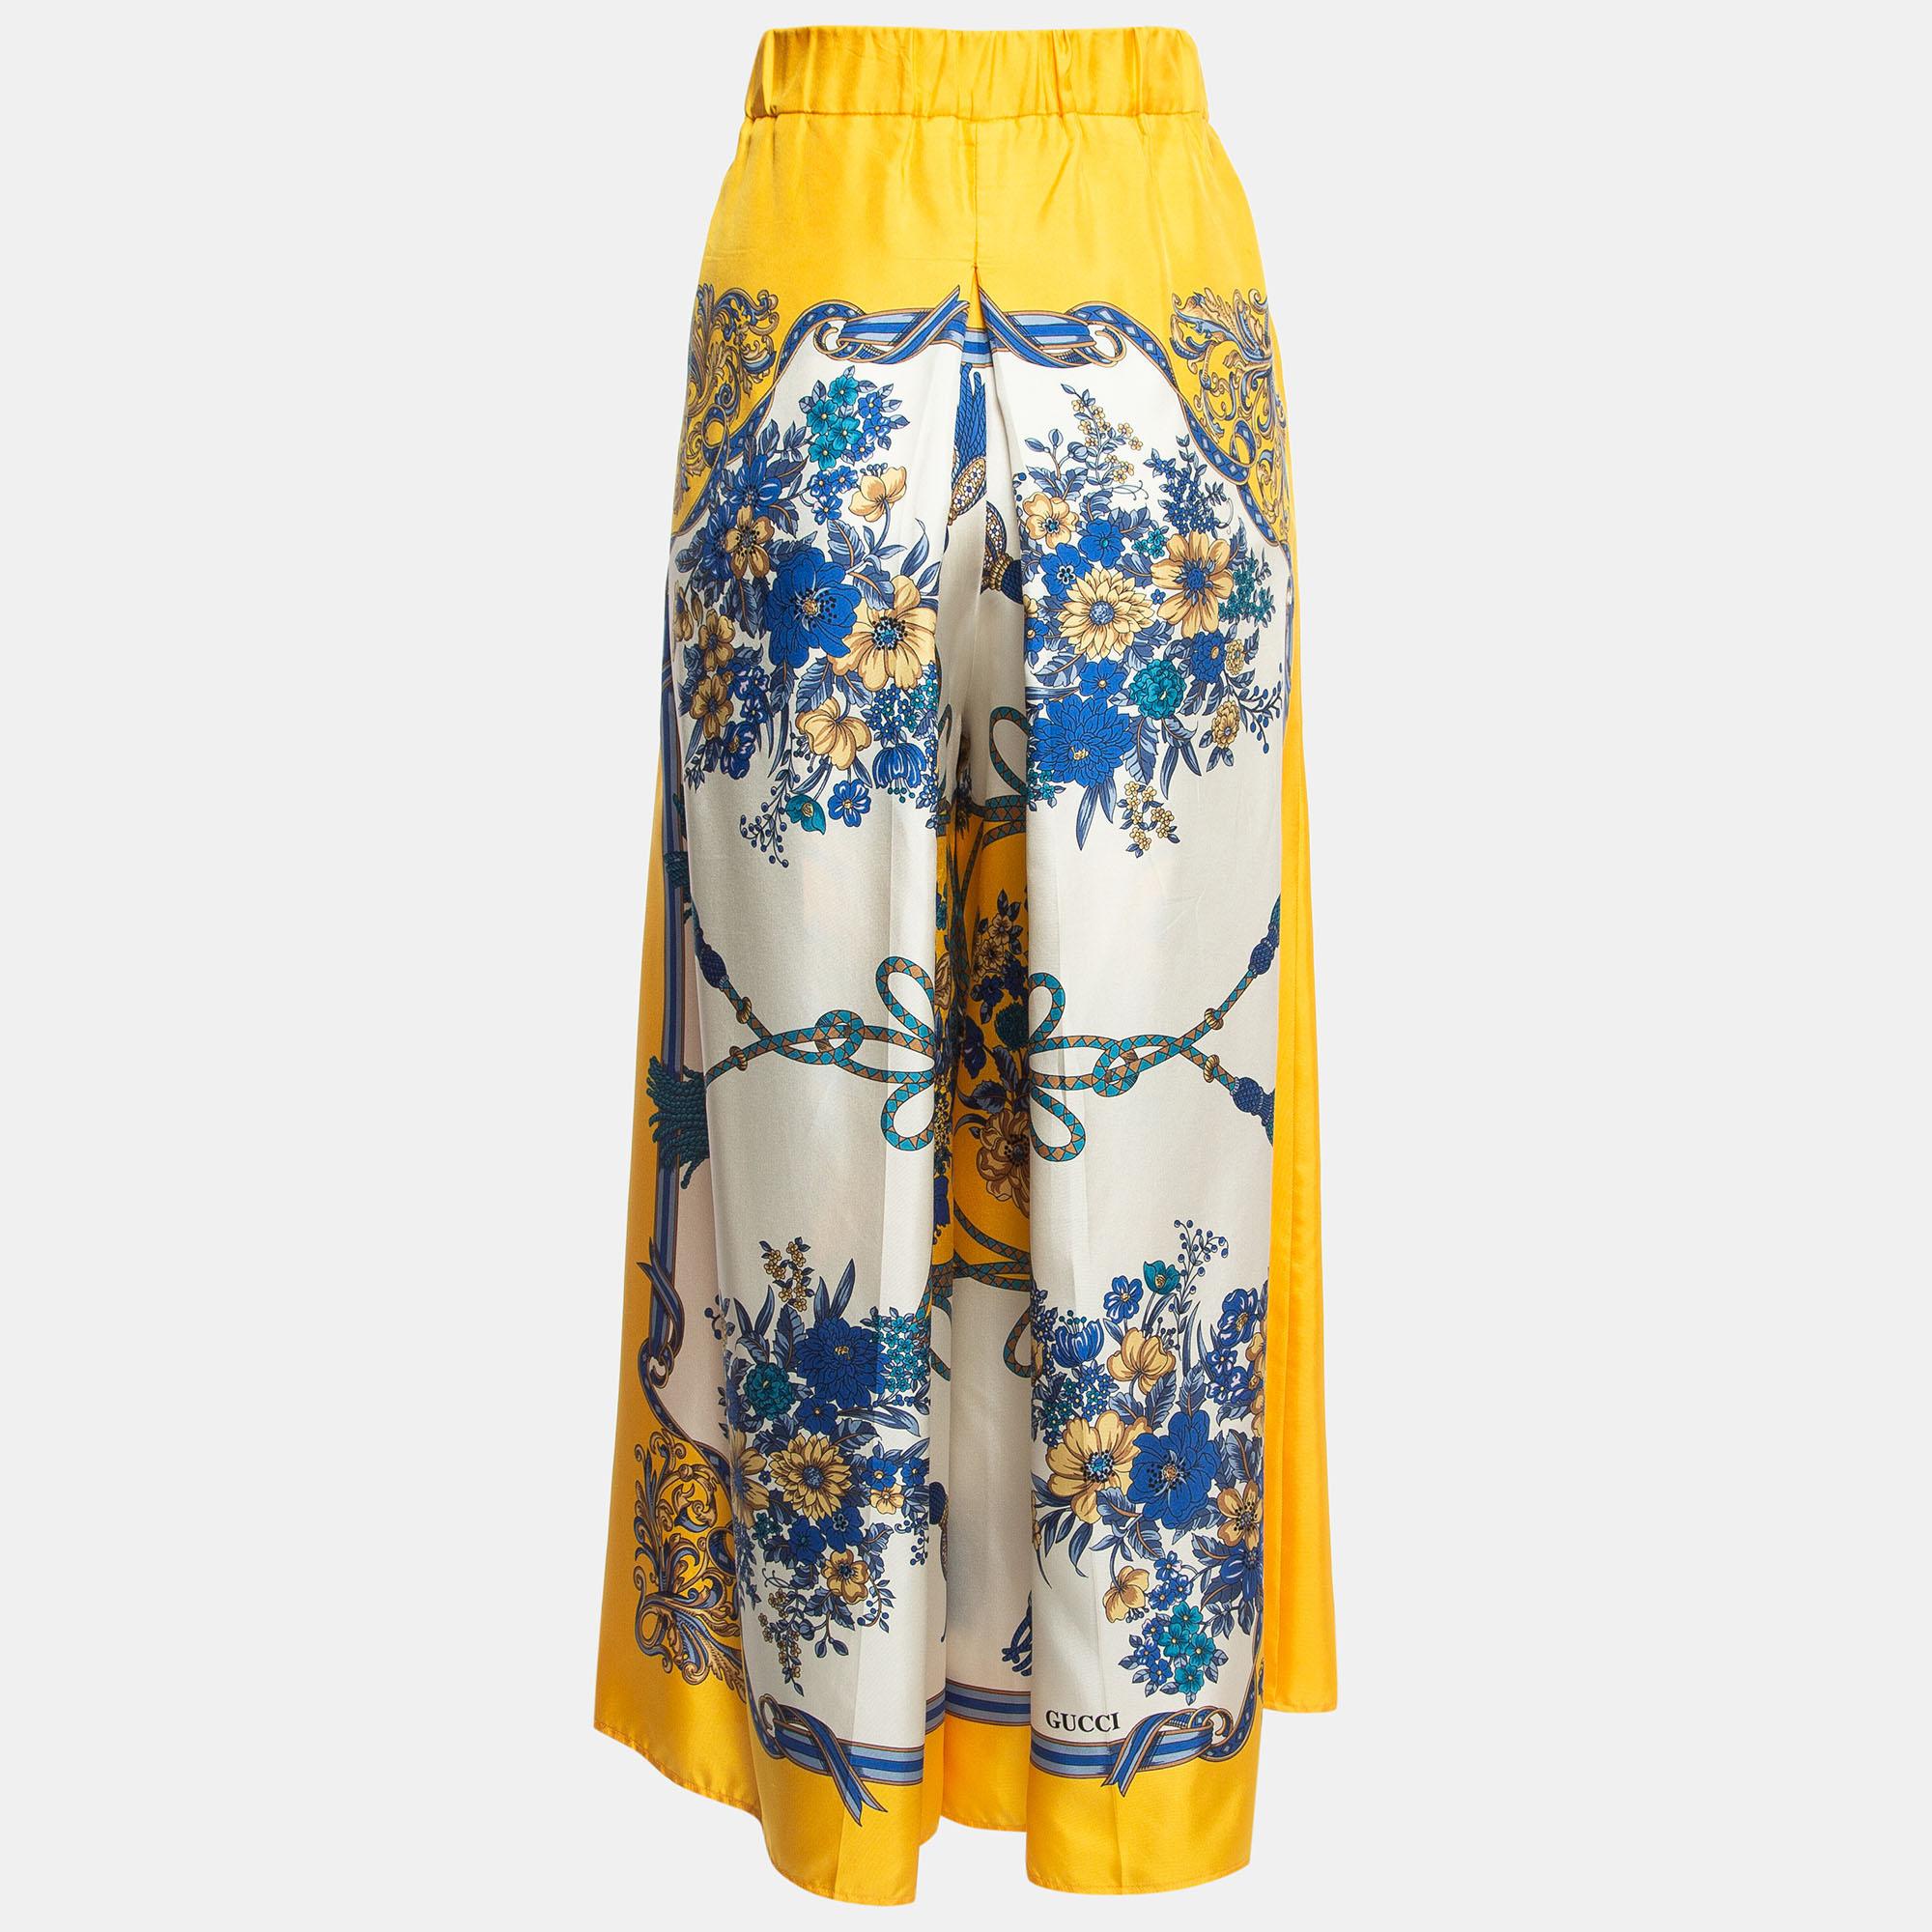 These amazing palazzo pants from Gucci are incredibly chic and effortlessly stylish. The yellow pants are designed with a striking print all over and equipped with two pockets. They will lend you a fantastic fit and will look great with simple